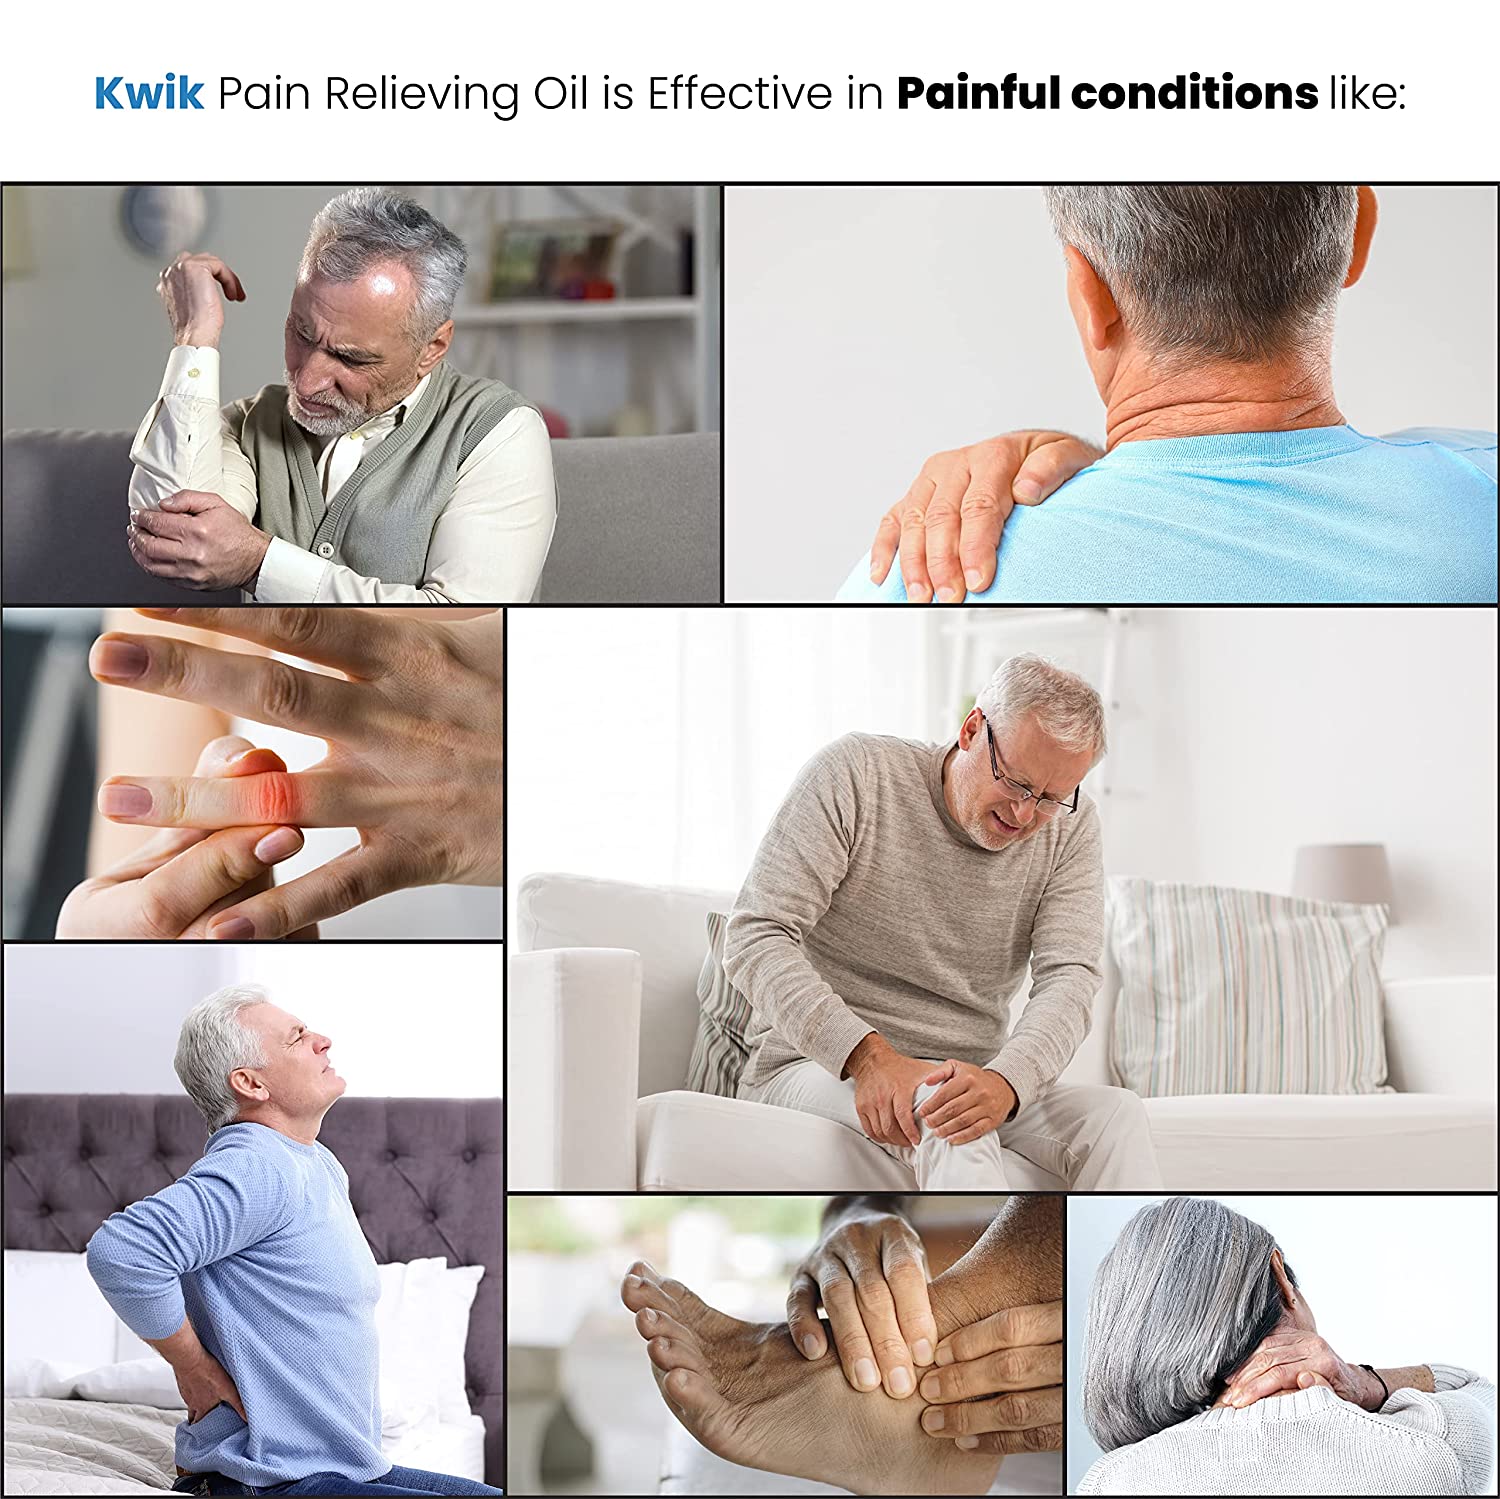 An image shows the effectiveness of Kwik Pain Relief Oil for body pain